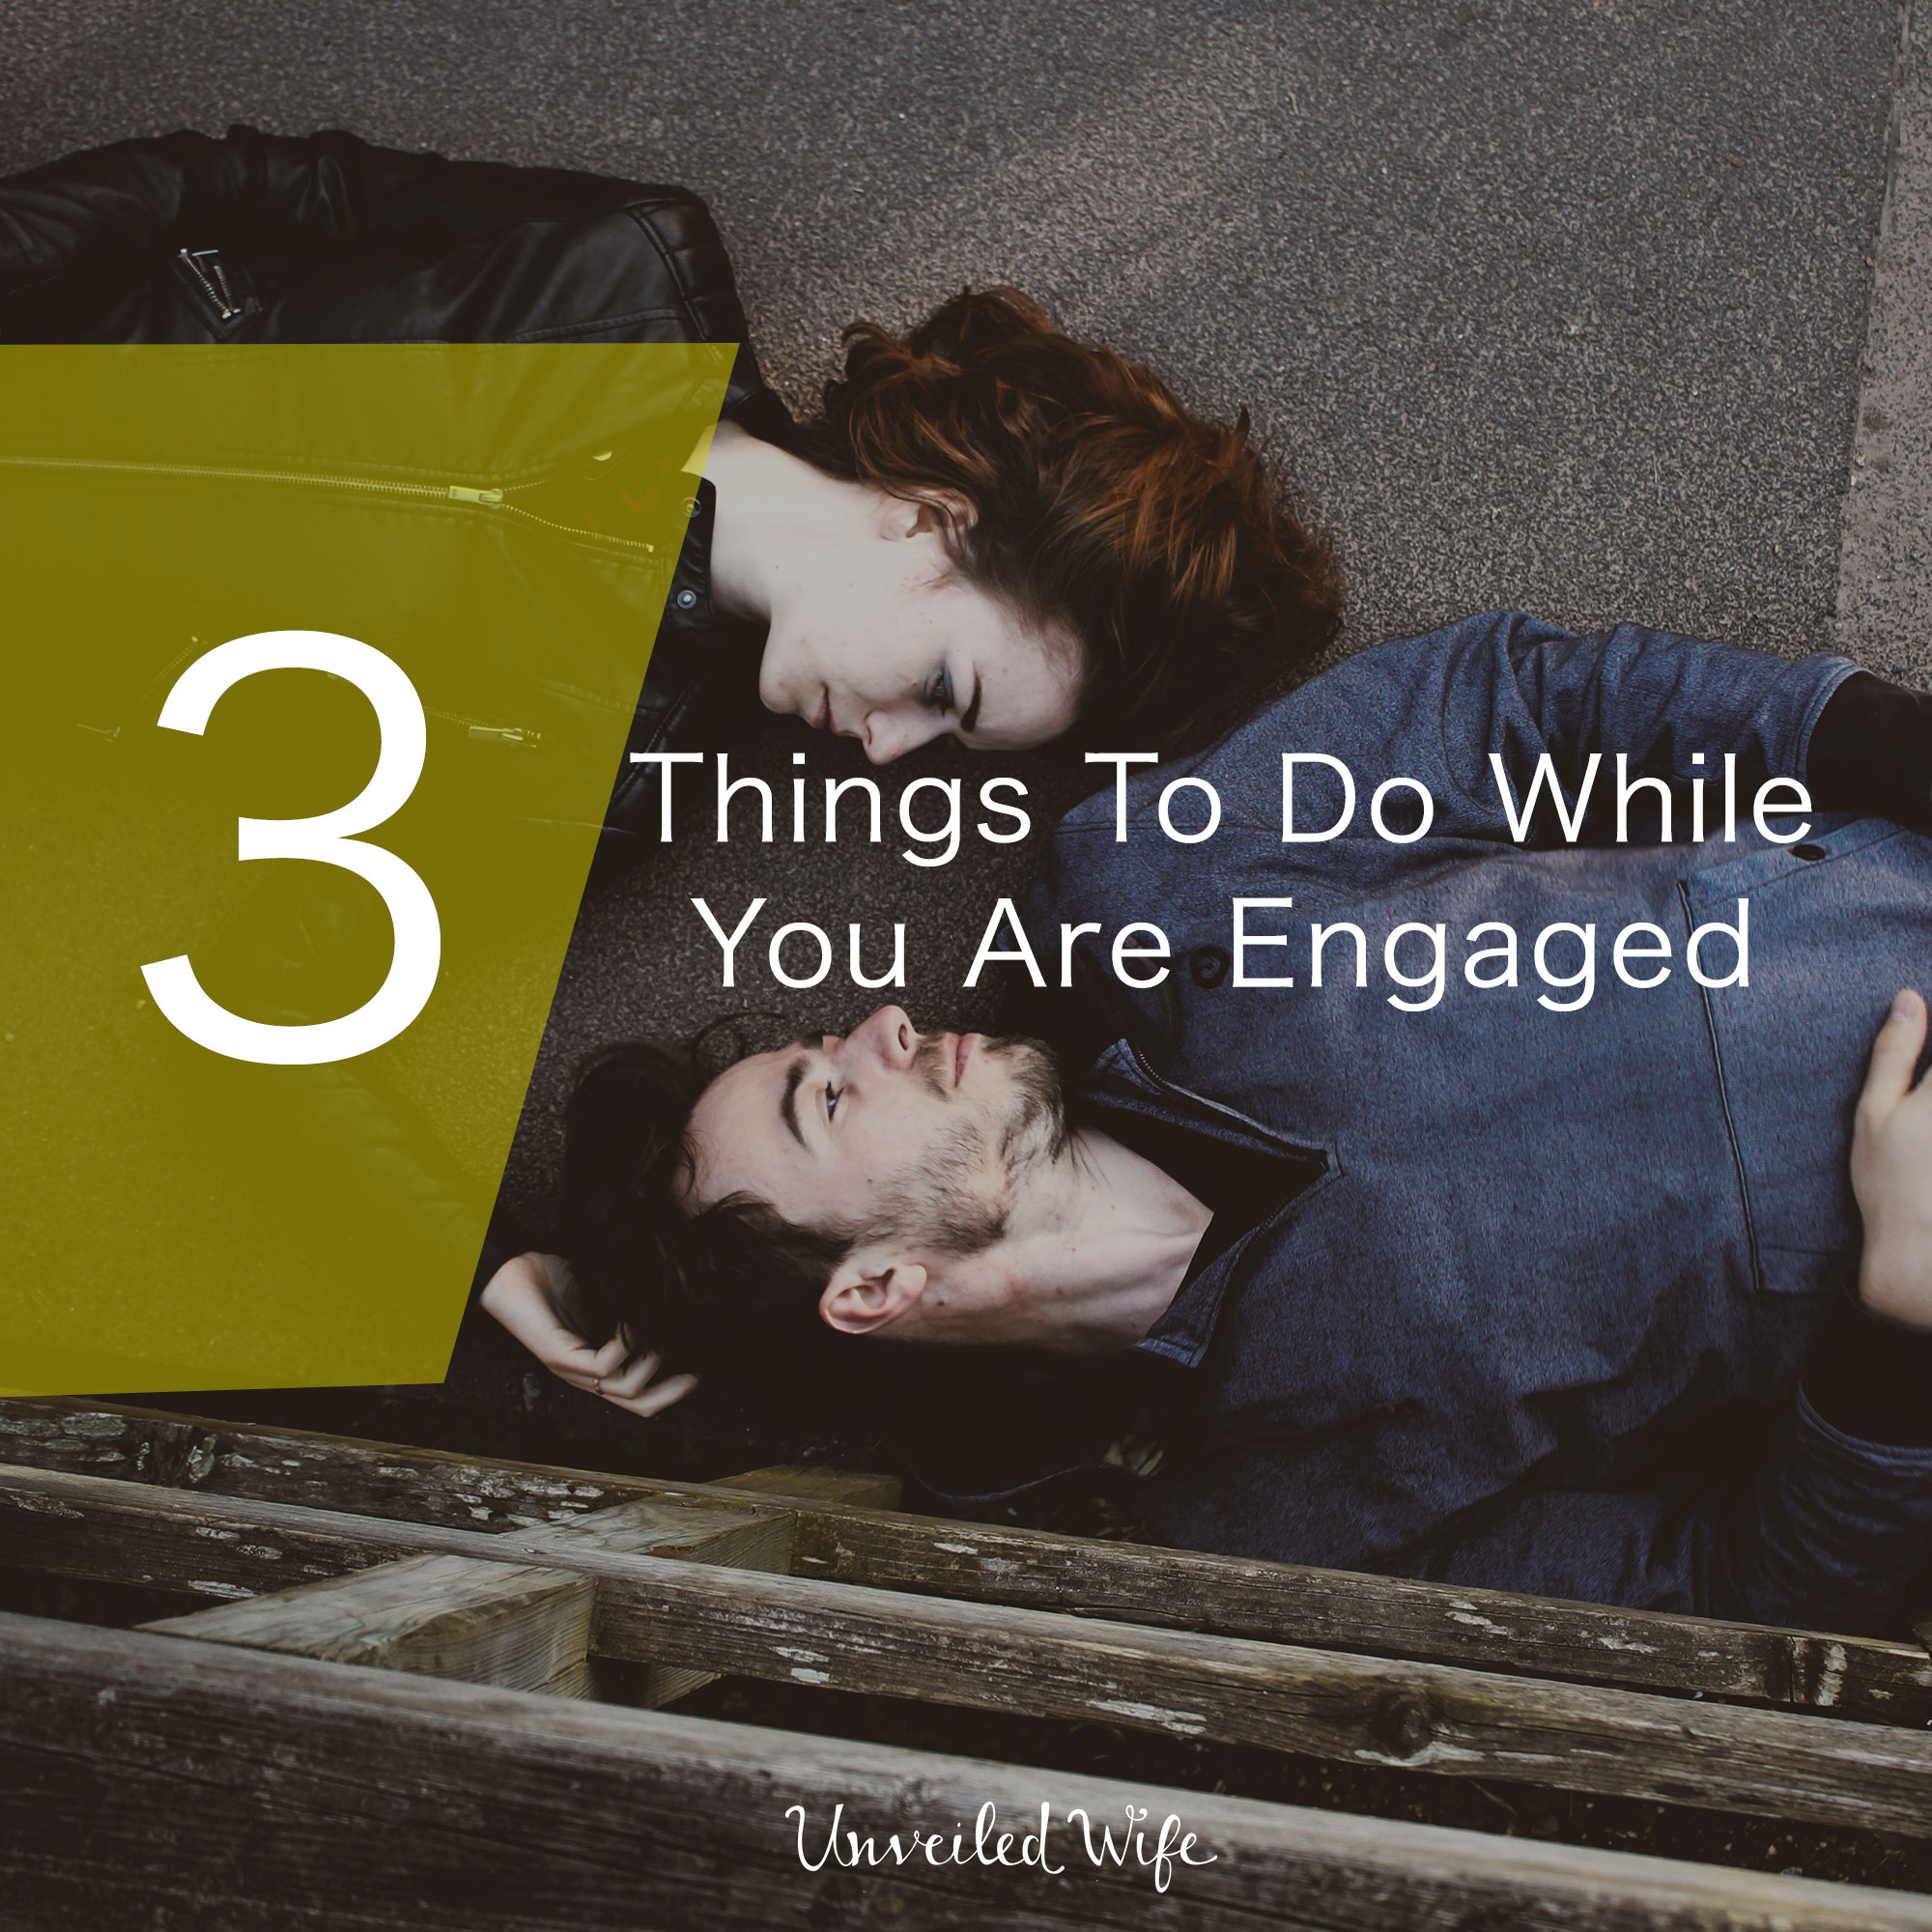 3 Things To Do While You Are Engaged